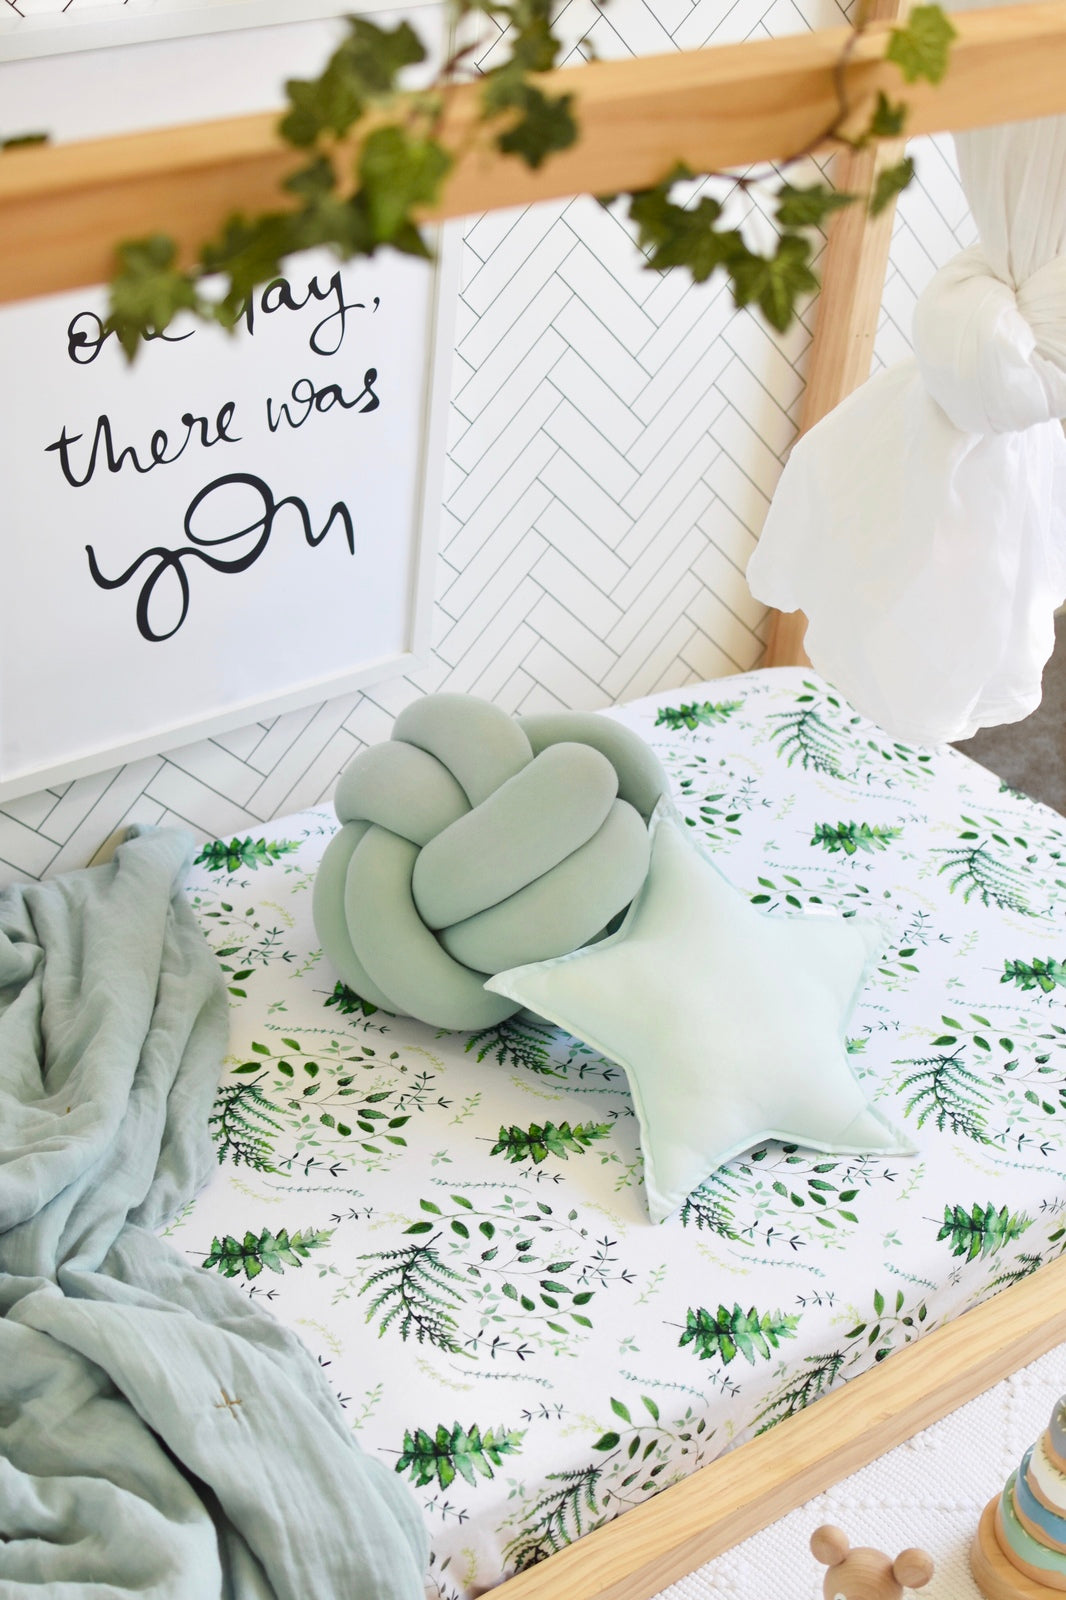 Fitted Cot Sheet - Enchanted Cot Sheet Snuggle Hunny Kids 